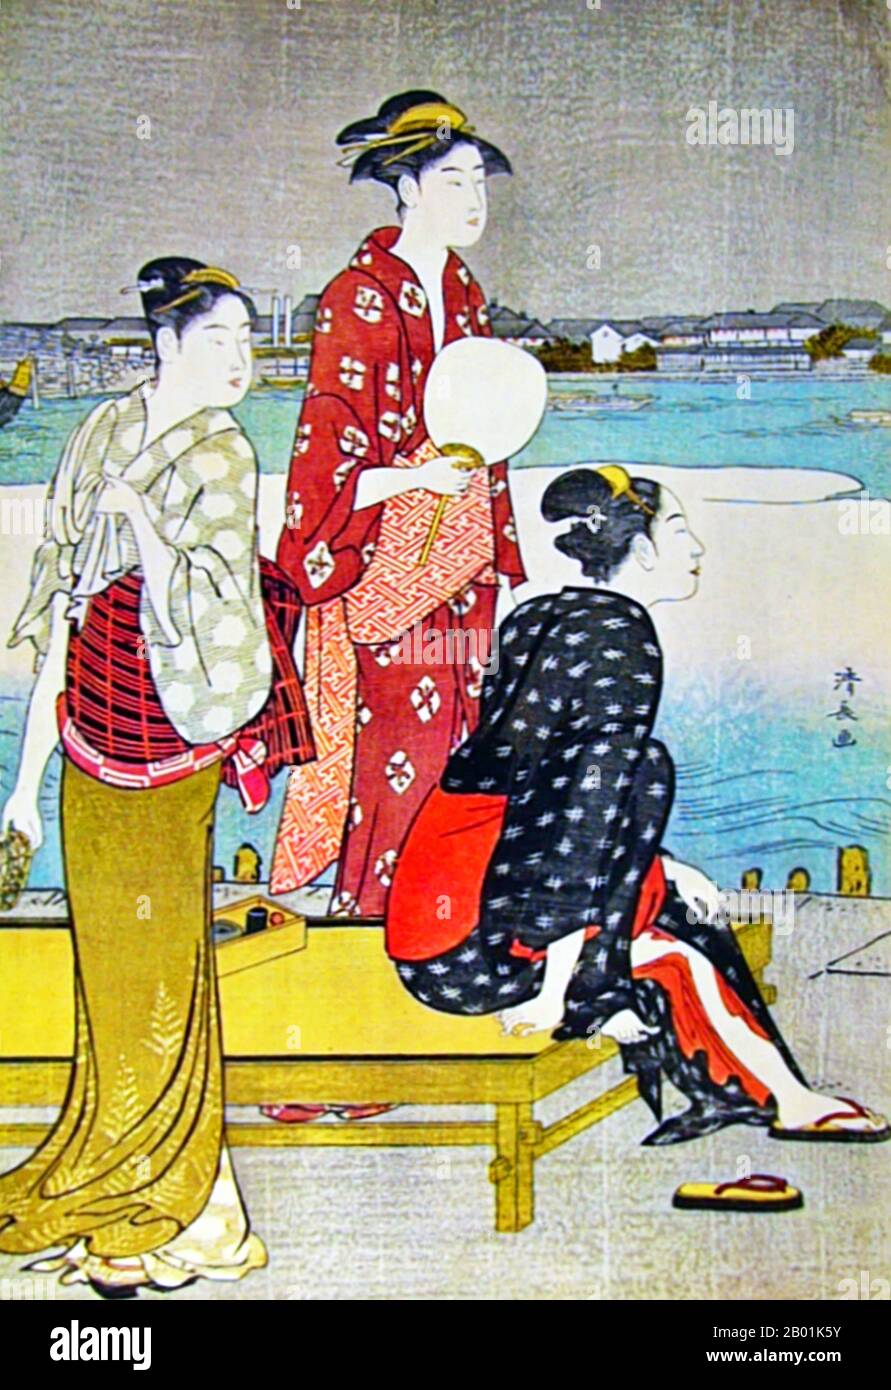 Japan: 'Cooling off by the Riverside'. Ukiyo-e woodblock print by Torii Kiyonaga (1752 - 28 June 1815), c. 1785.  Torii Kiyonaga was a Japanese ukiyo-e printmaker and painter of the Torii school. Originally Sekiguchi Shinsuke, the son of an Edo bookseller, he took on Torii Kiyonaga as an art-name (gō). Although not biologically related to the Torii family, he became head of the group after the death of his adoptive father and teacher Torii Kiyomitsu. Stock Photo